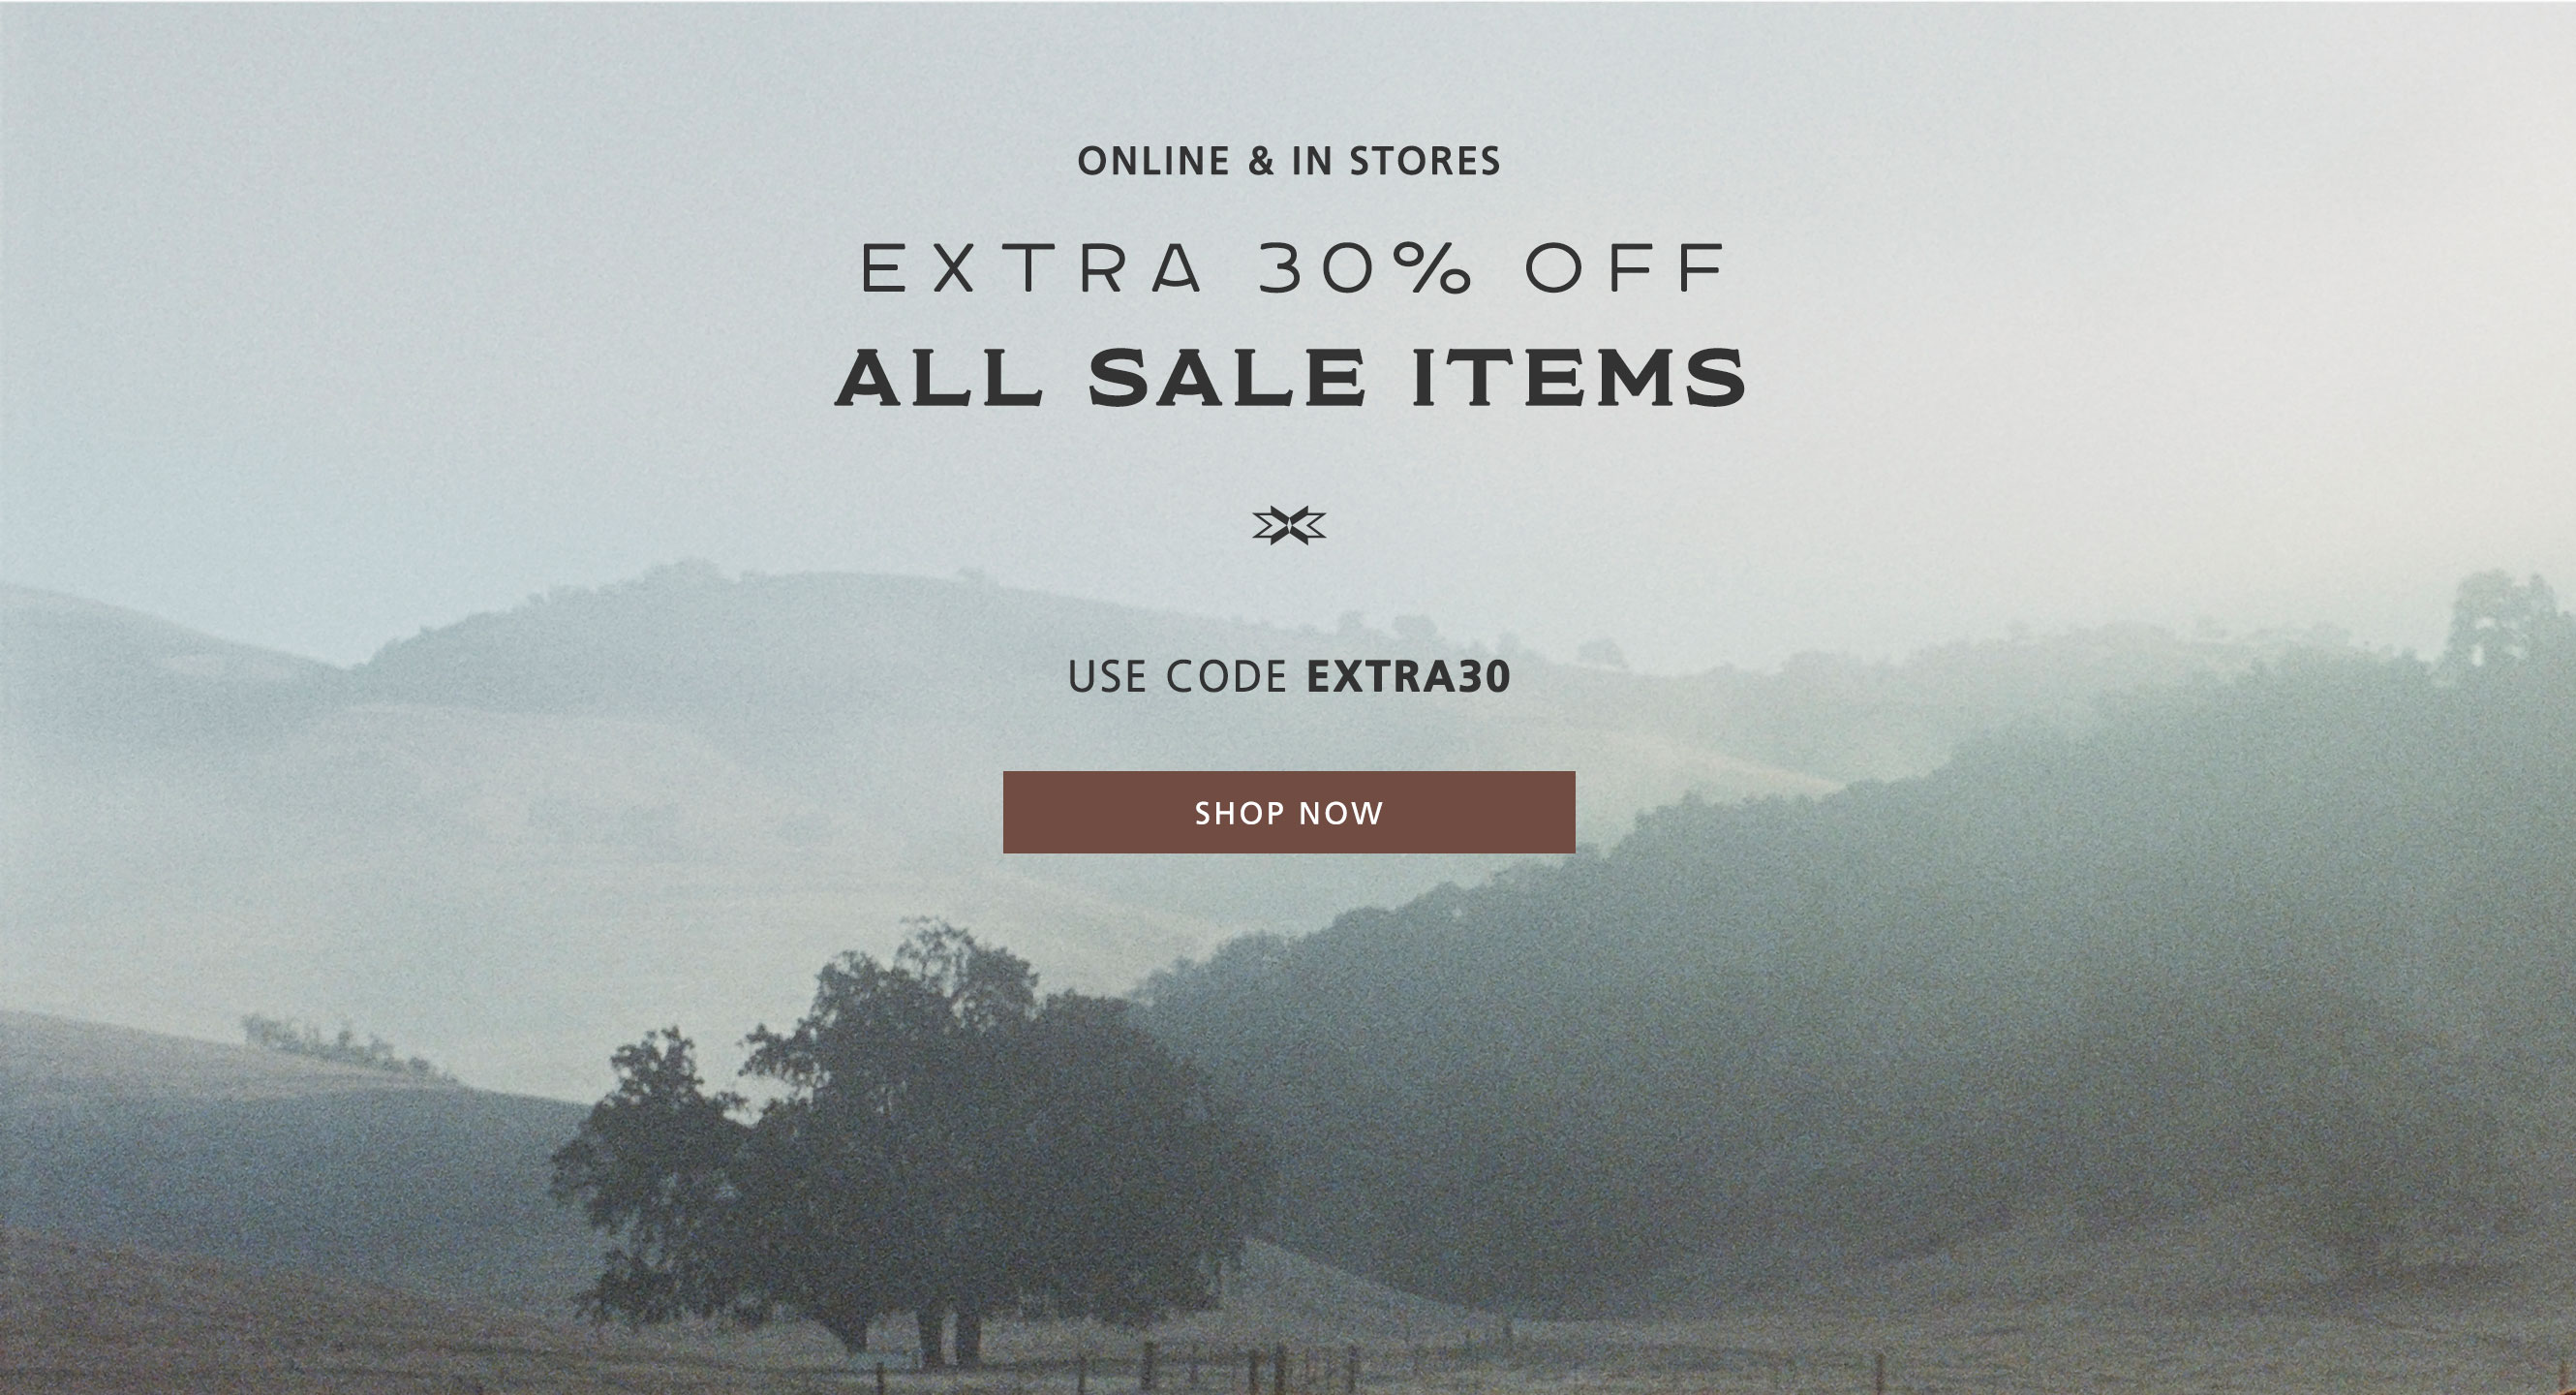 Extra 30% off all sale items - Use code EXTRA30